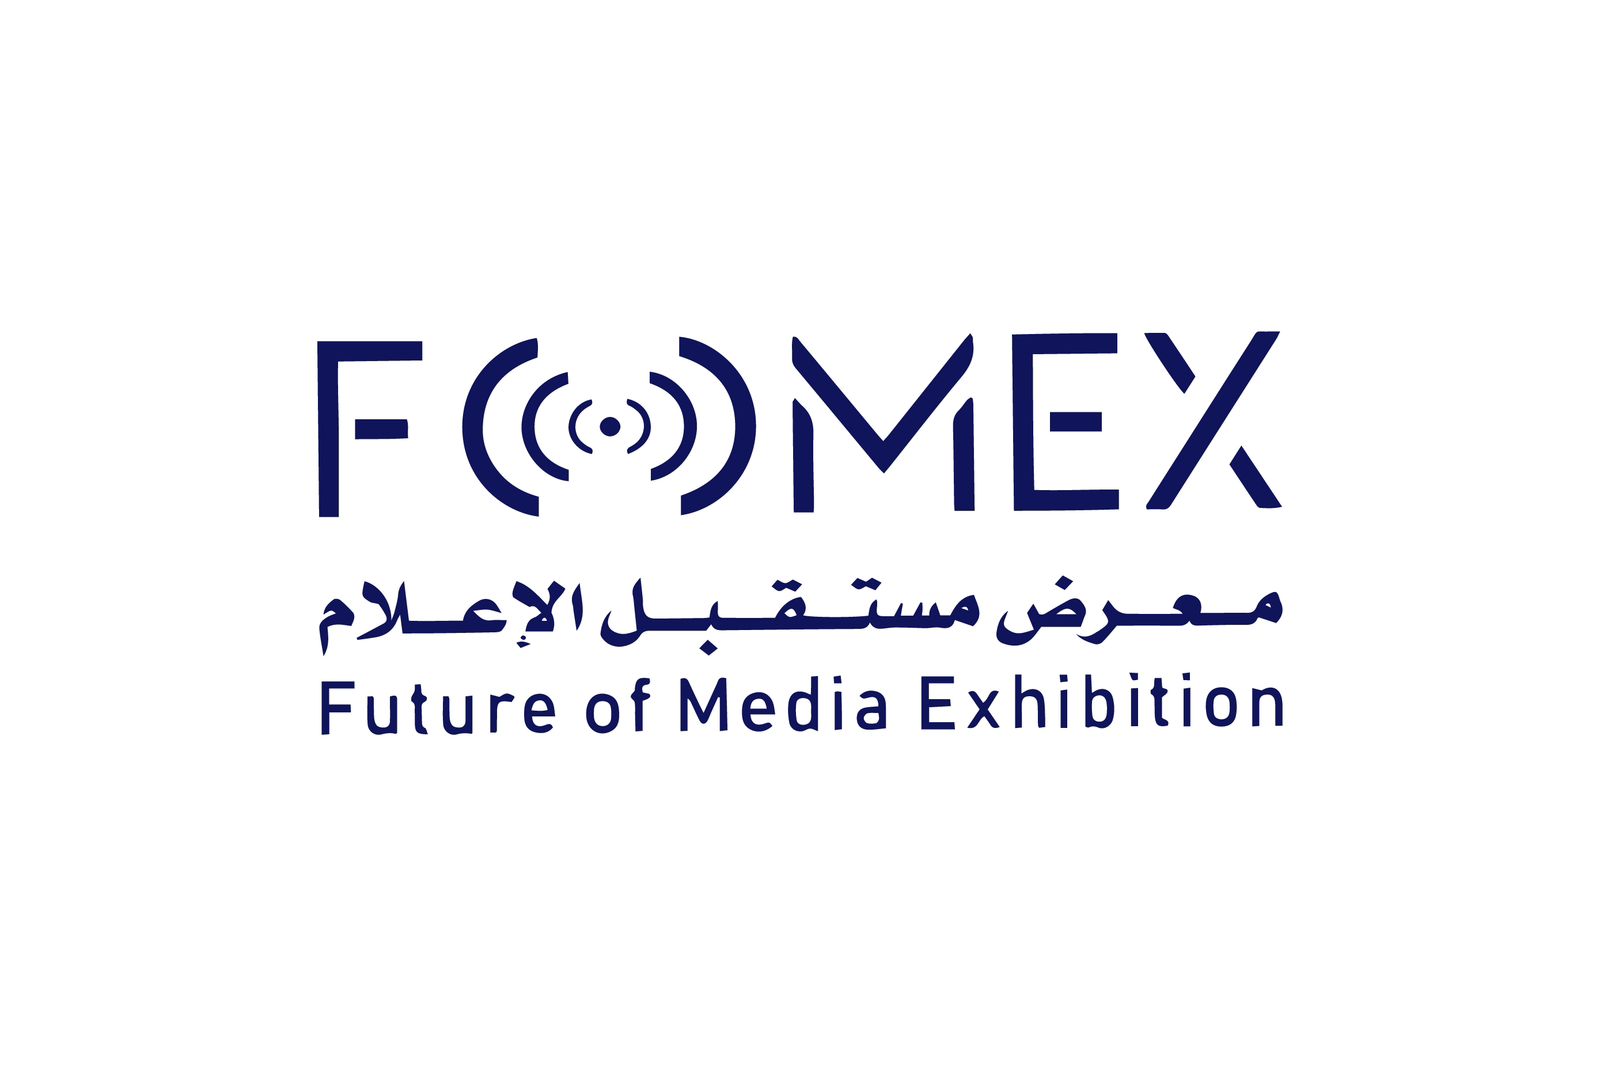 Saudi Research & Media Group" as the Media Sponsor for the Saudi Media Forum and the FOMEX exhibition